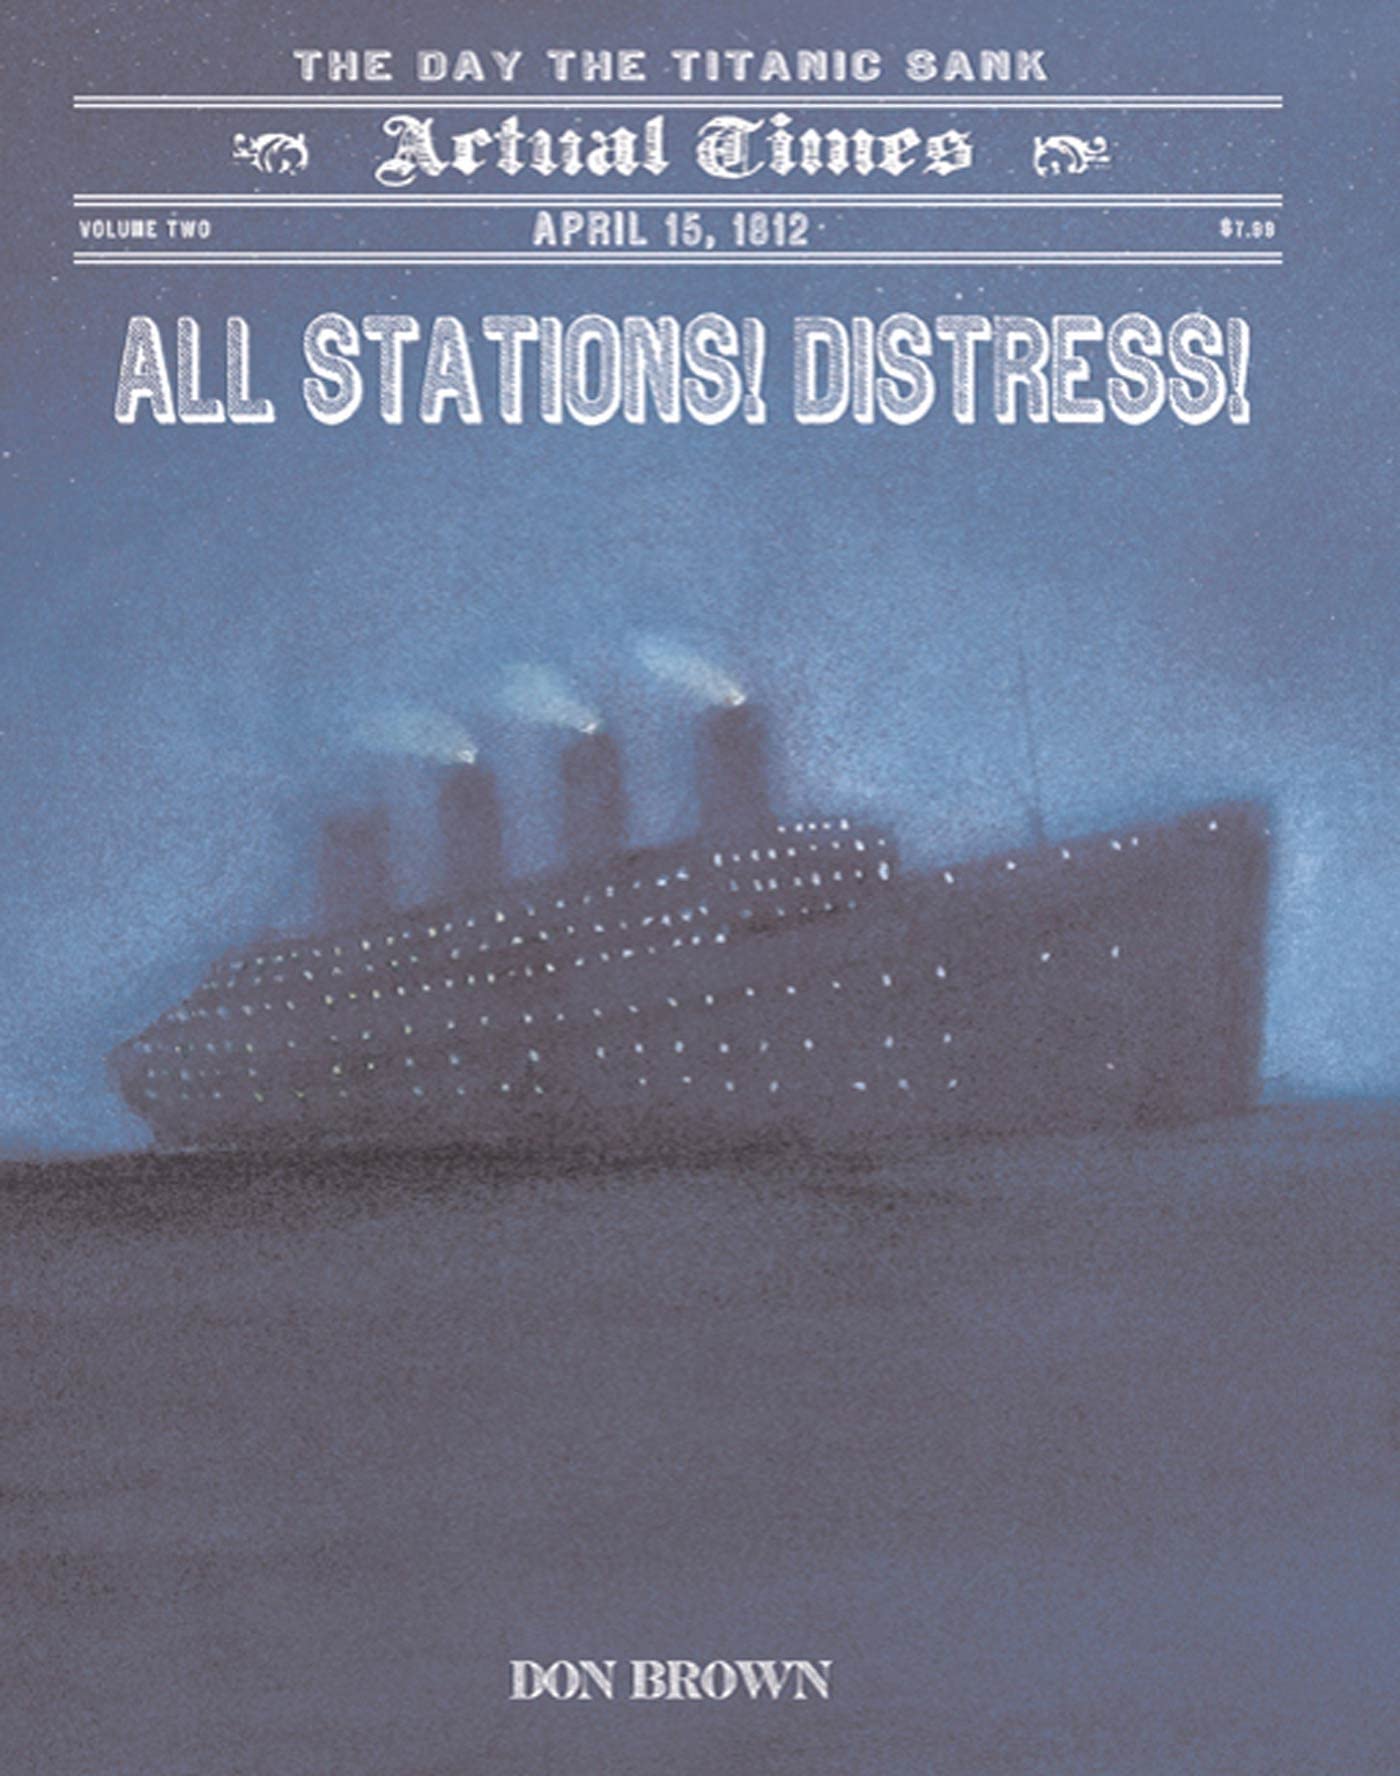 All Stations! Distress!: April 15, 1912, the Day the Titanic Sank (Paperback)